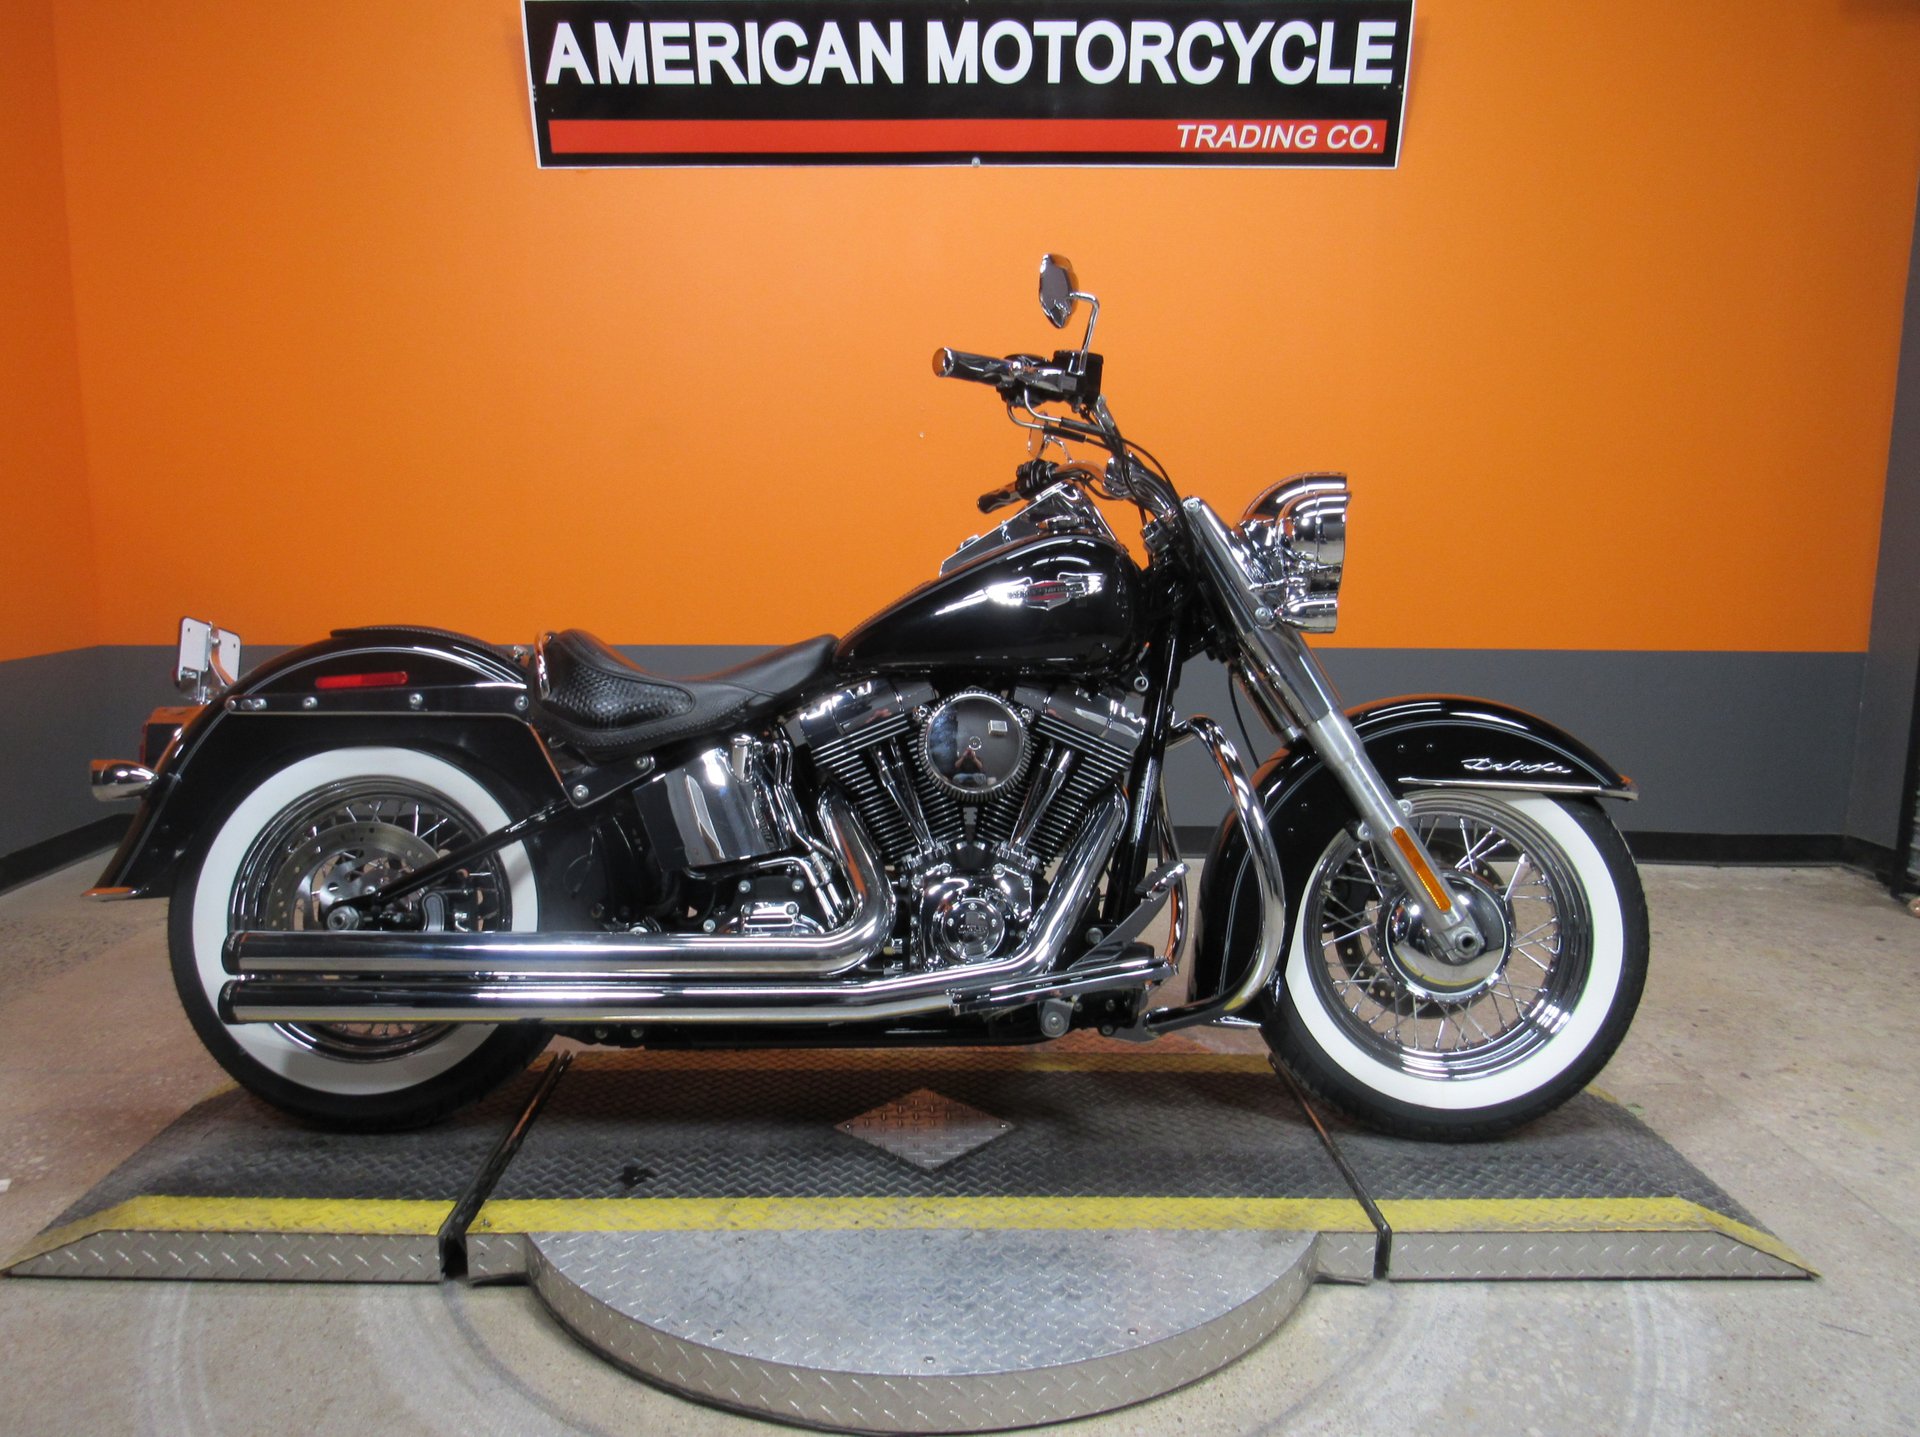 2012 Harley Davidson Softail Deluxe American Motorcycle Trading Company Used Harley Davidson Motorcycles